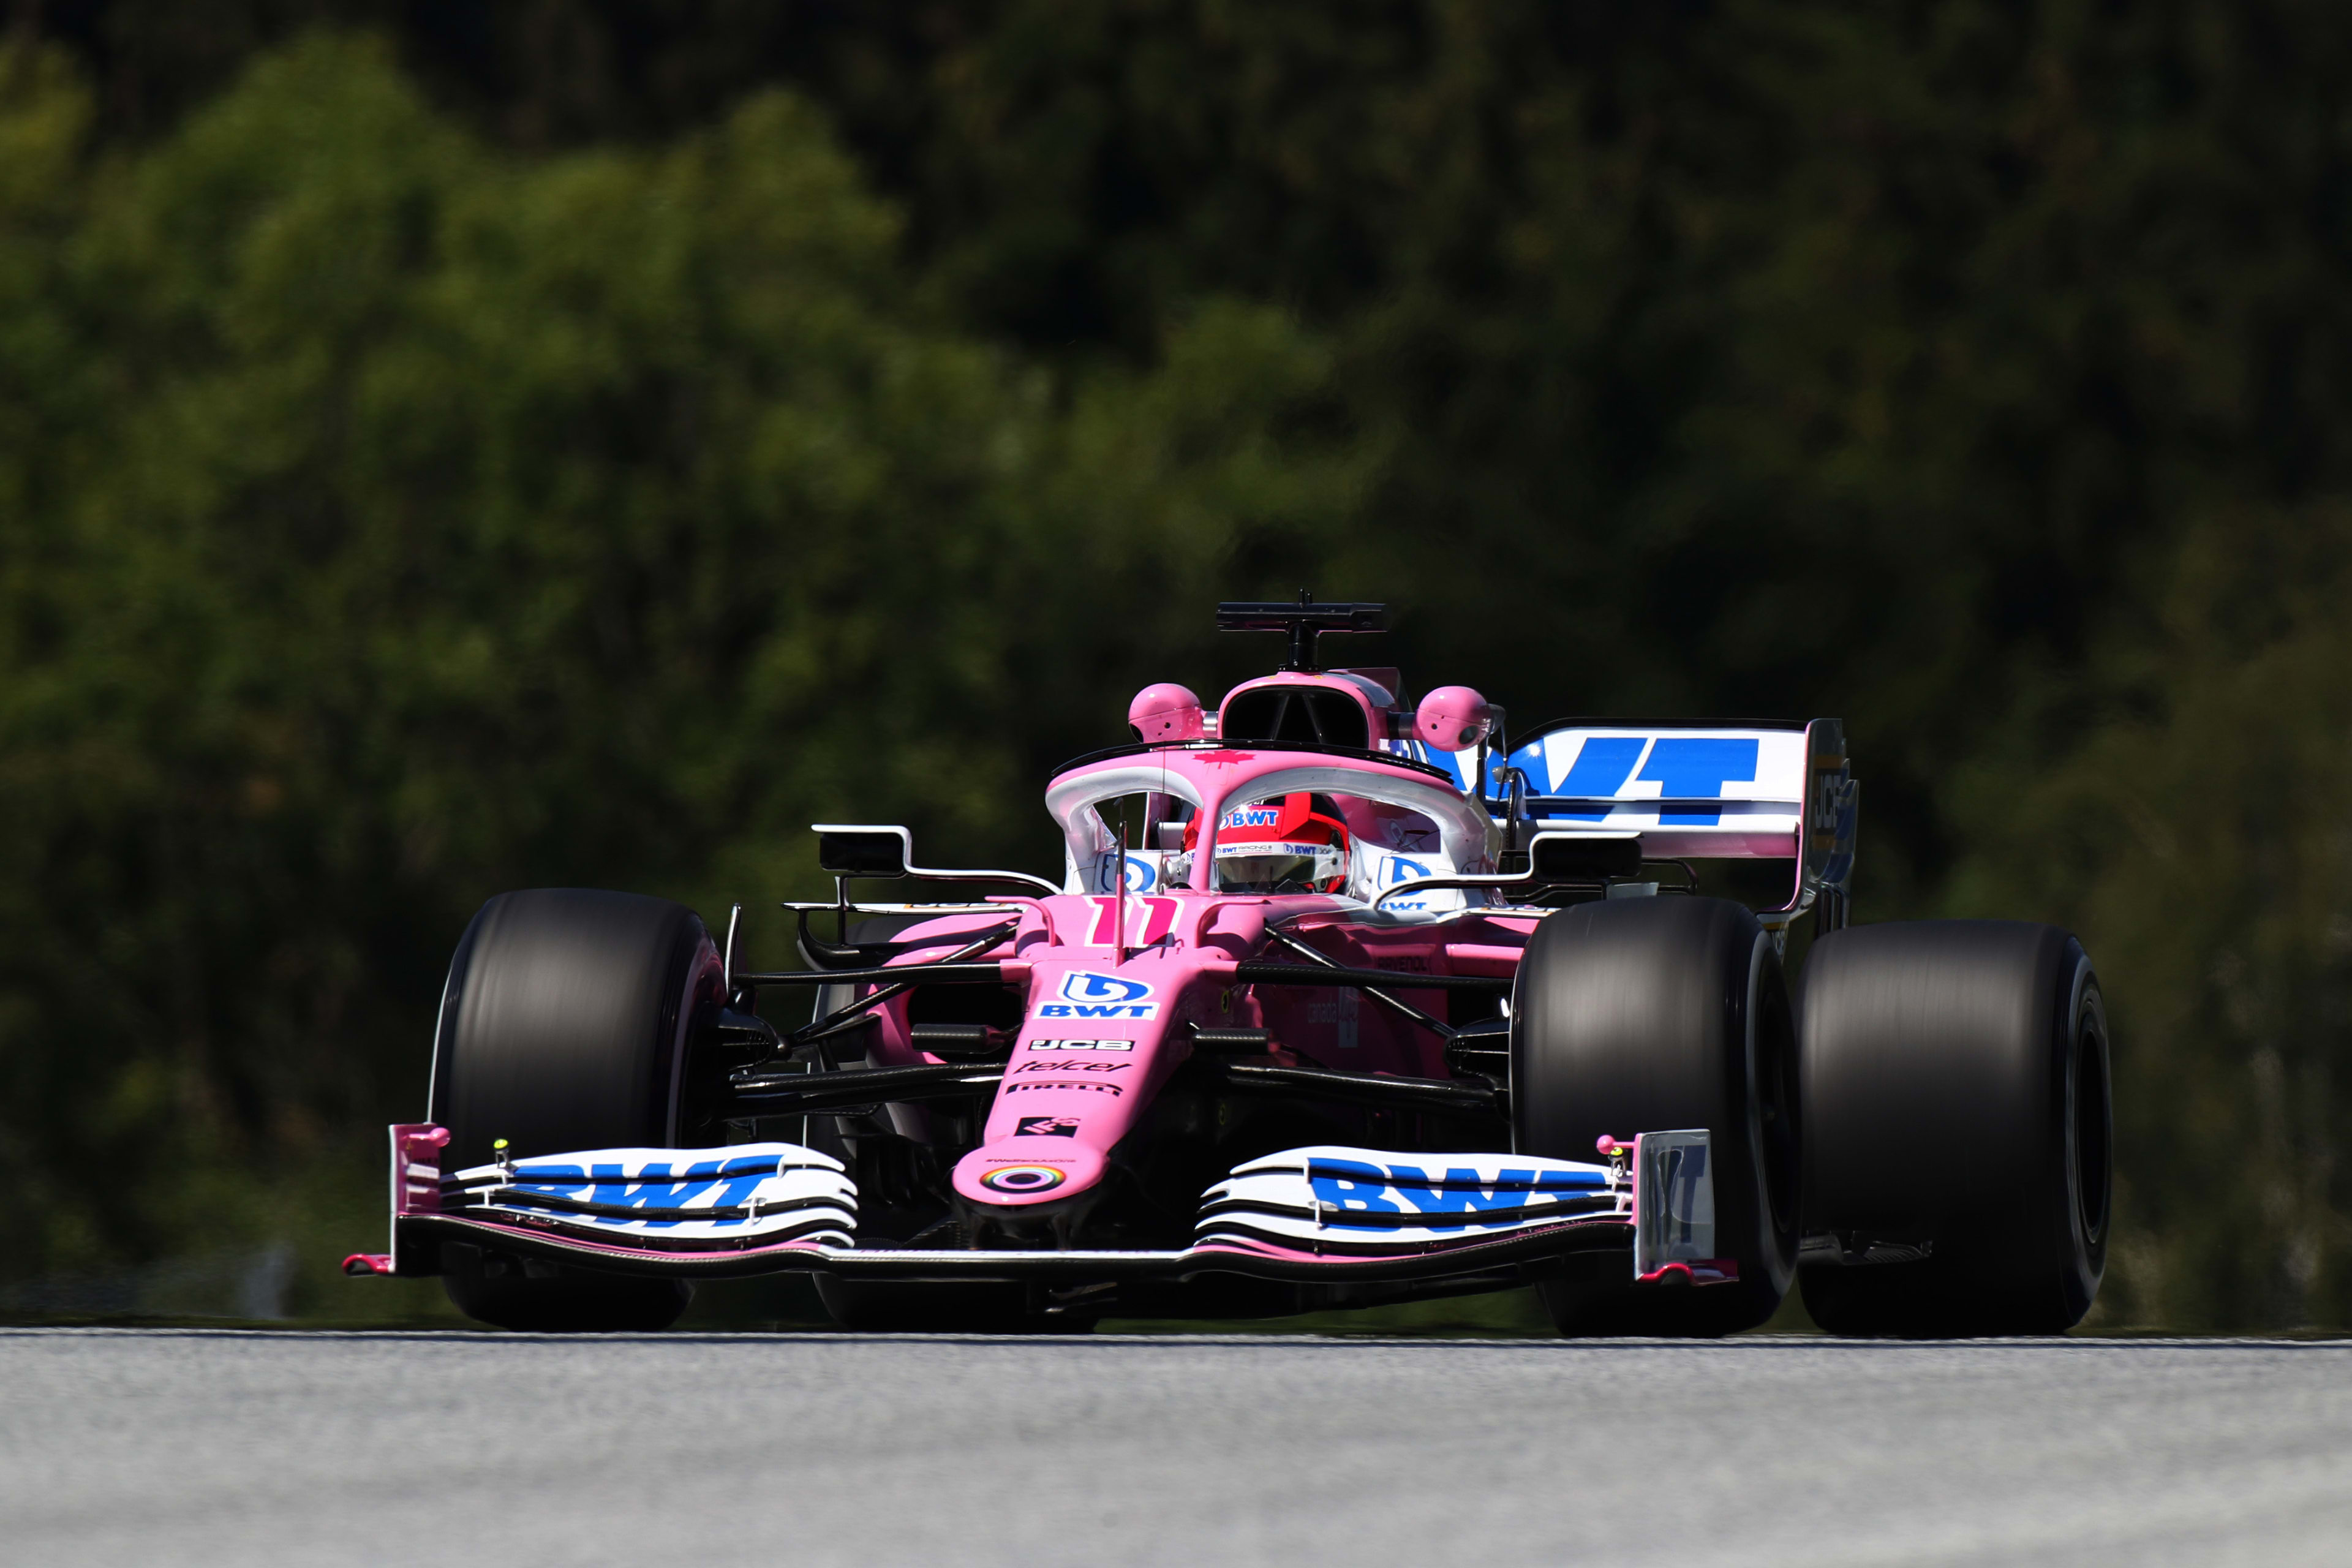 2020 Styrian Grand Prix FP1 report and highlights Perez sets the pace as Racing Point star in first practice Formula 1®